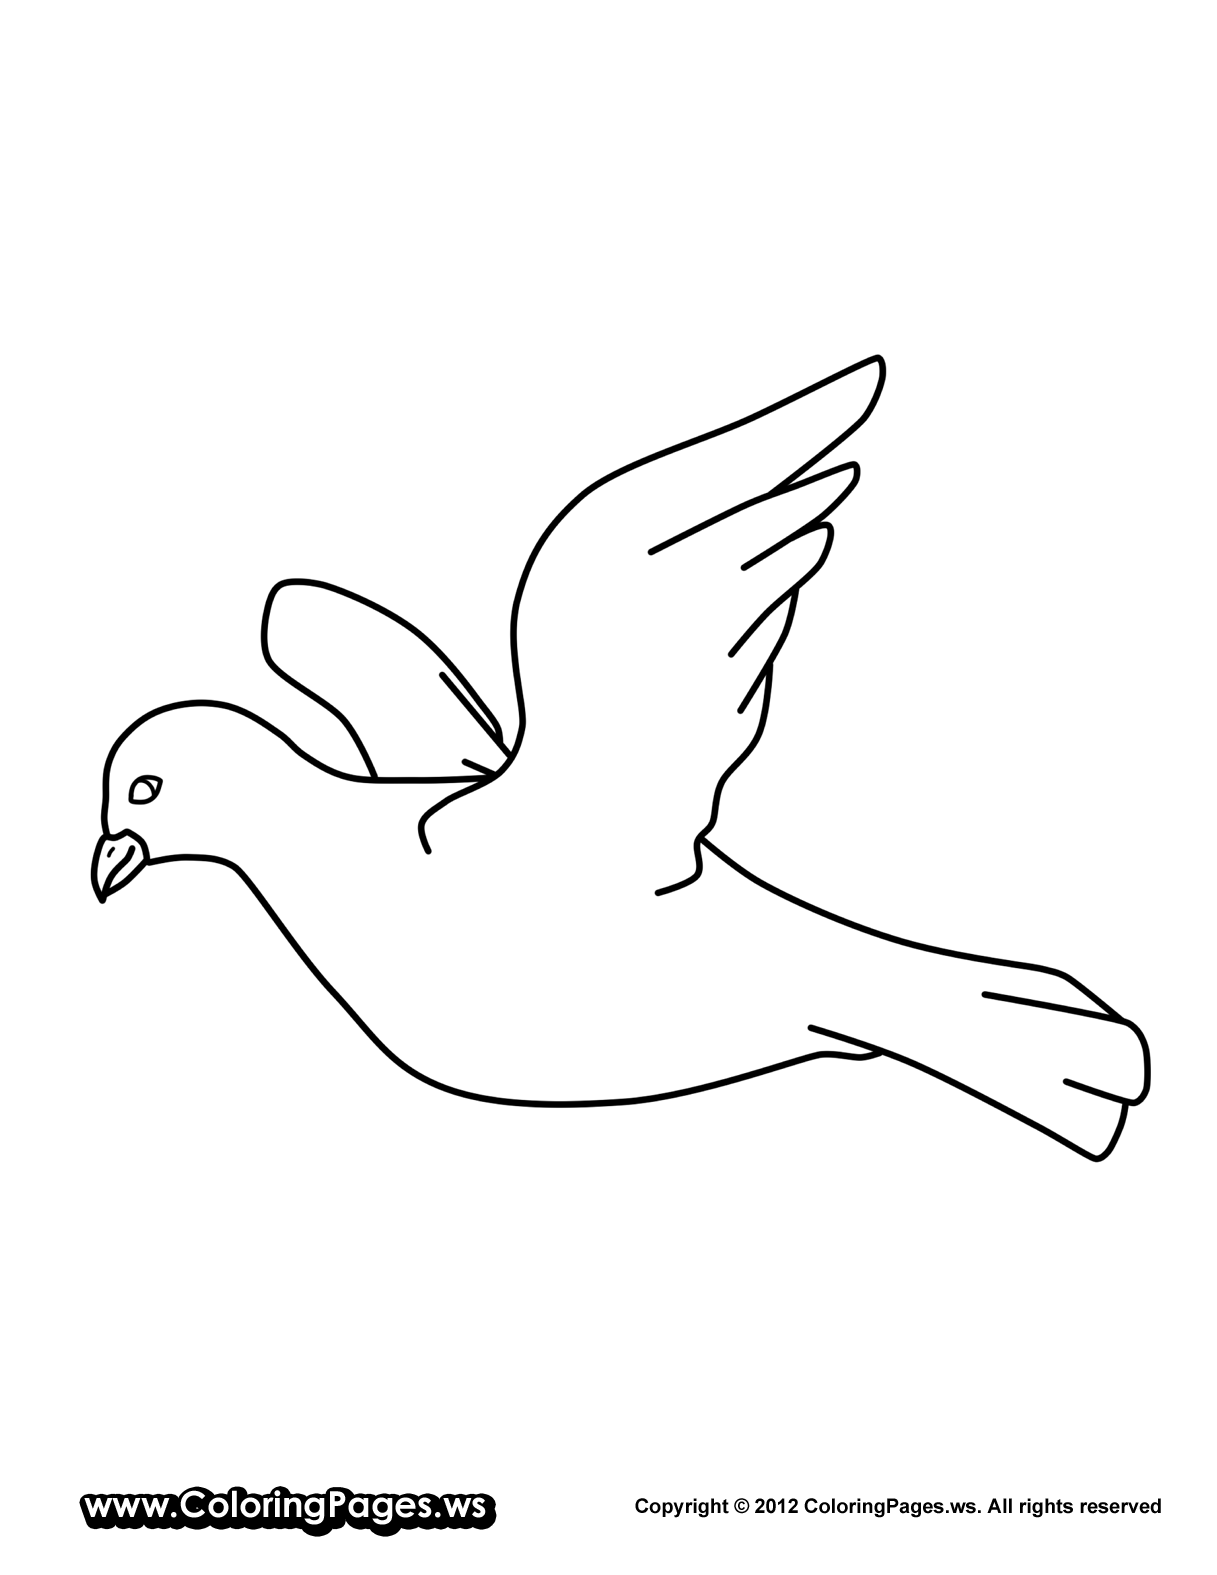 Dove Coloring Page - Coloring Pages for Kids and for Adults